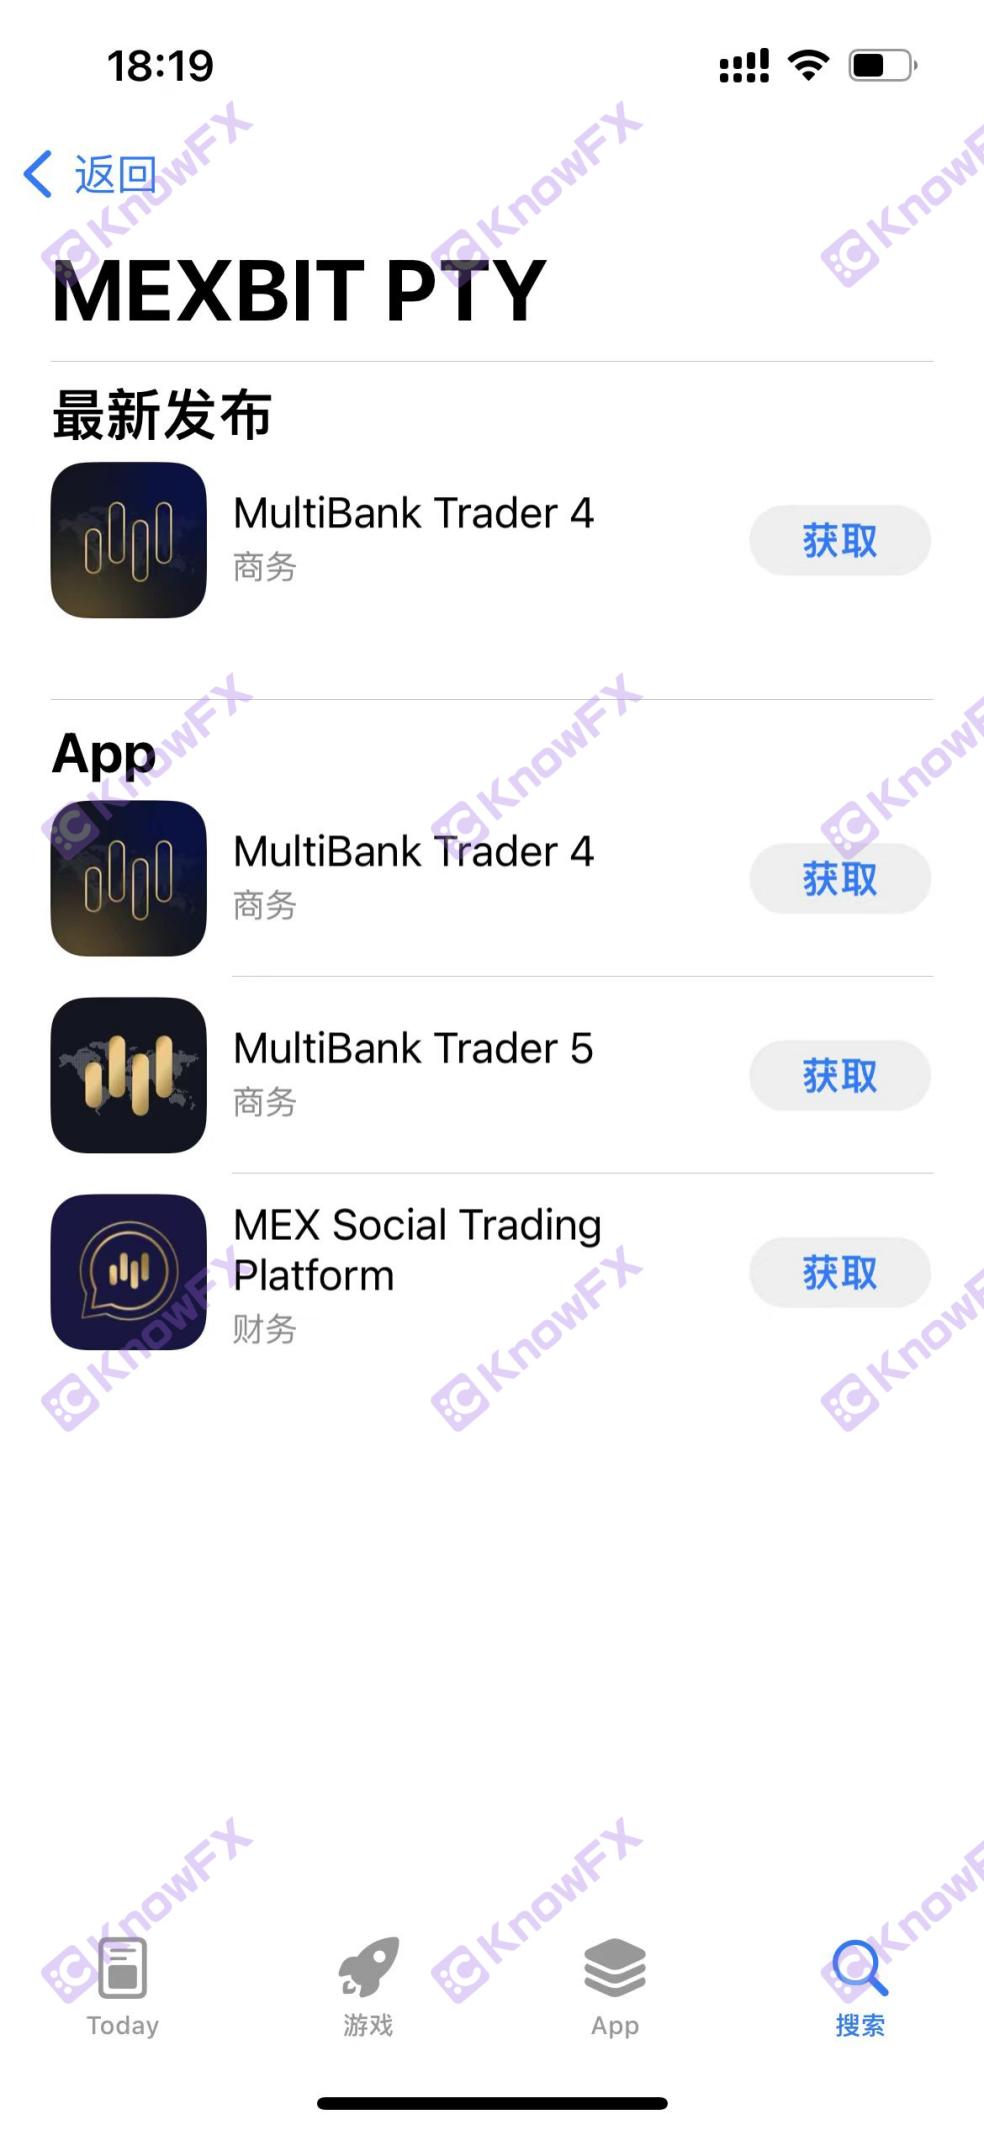 Forex securities firms Multibank Group Datong Financial Group uses a registered company to pretend to be a foreign exchange transaction!Self -developed app dipped in MT4, 5-第16张图片-要懂汇圈网